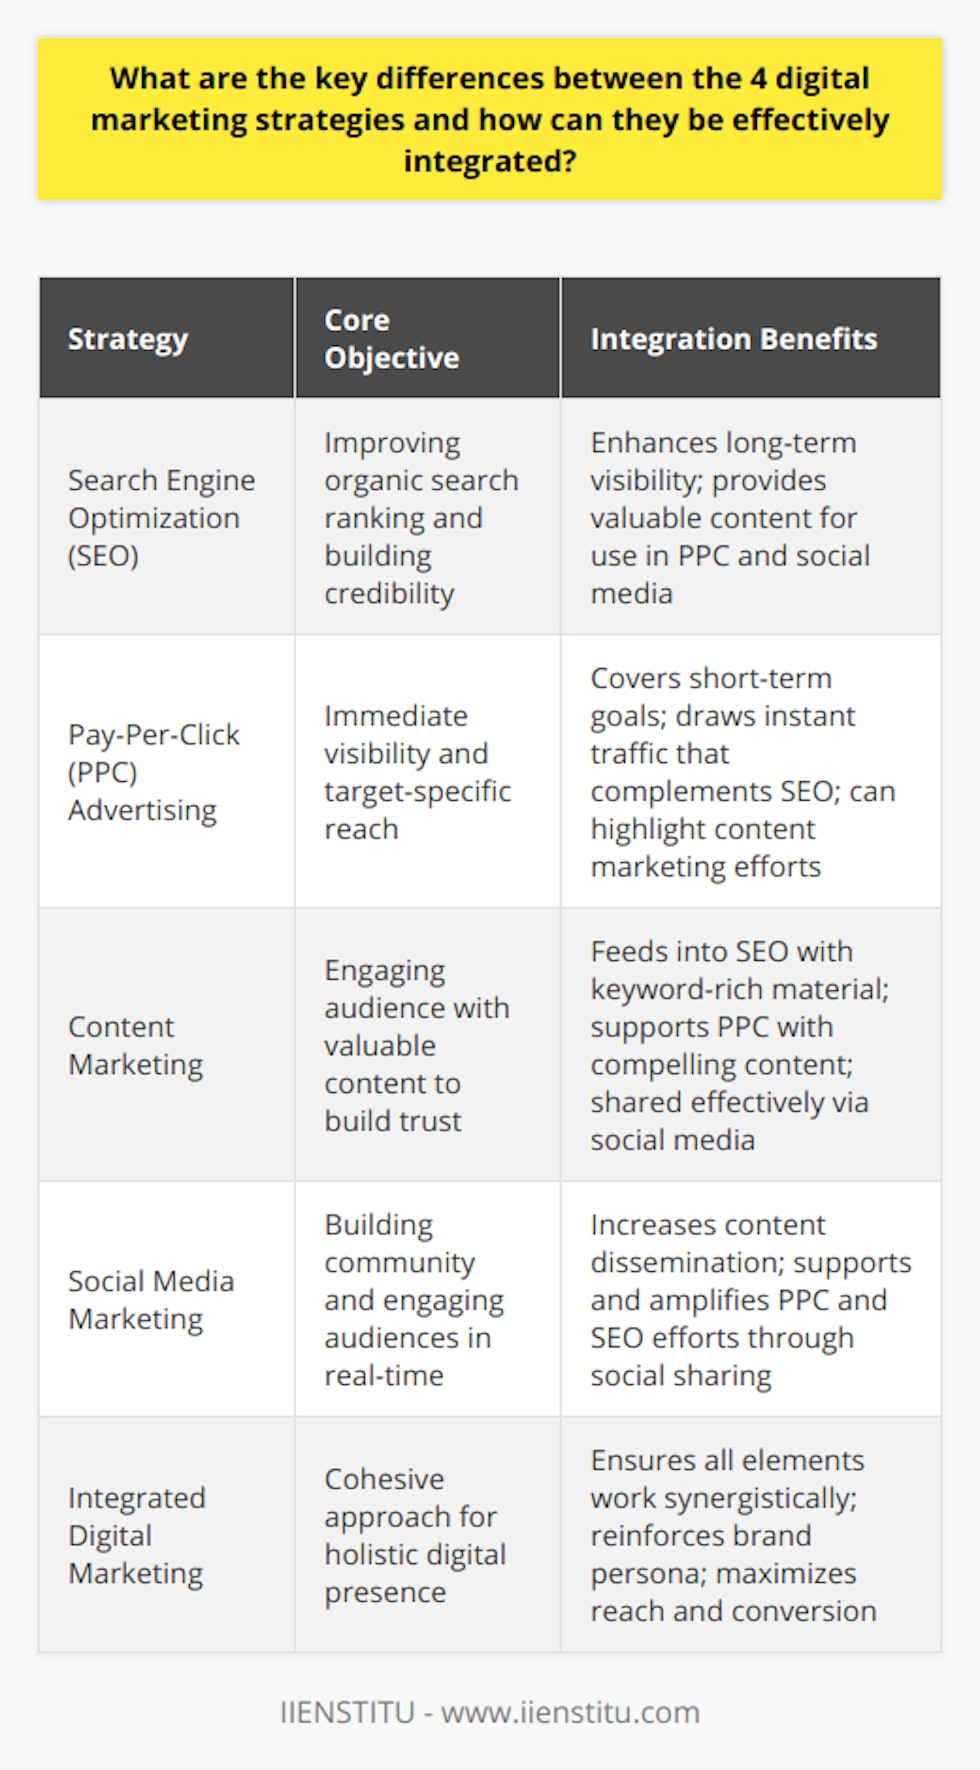 The digital marketing landscape is defined by different strategies, each serving specific objectives and reaching audiences in various ways. Among these, the four key strategies often discussed are Search Engine Optimization (SEO), Pay-Per-Click (PPC) advertising, content marketing, and social media marketing. Understanding the distinctive nature of each, along with their integration, is crucial for a cohesive digital marketing approach.SEO and PPC: A Dual Approach for VisibilitySEO is the art and science of enhancing a website to improve its ranking in the organic results of search engines. A strong SEO strategy relies on the understanding of search algorithms, the strategic use of keywords, and the creation of high-quality content that provides value to the reader. It is a long-term strategy aimed at building credibility and driving consistent traffic to a website.In contrast, PPC is a model where advertisers pay a fee each time their ad is clicked. These are the ads that typically appear above the organic search results and offer instant visibility. PPC campaigns can be precisely targeted and are easily adjustable, making them ideal for short-term promotional efforts.While SEO is organic and cost-effective in the long run, PPC can be costly but offers immediate results. Combining these two ensures a comprehensive search strategy that covers both immediate and long-term visibility.Content Marketing: The Heart of Digital EngagementContent marketing centers on the creation and sharing of content to stimulate interest in a brand's offerings without explicitly promoting the brand itself. This strategy thrives on the notion of giving to receive, with the aim of building trust and positioning a brand as a thought leader in its niche.Effective content marketing not only improves SEO by utilizing target keywords within valuable content but also serves as a conduit for PPC campaigns, whereby compelling content drives ad performance. It creates a rich pool of resources that can be shared across digital channels, providing depth to promotional activities and encouraging audience engagement.Social Media Marketing: Amplifying Reach and InteractionSocial media marketing exploits the power of platforms like Facebook, Twitter, Instagram, and LinkedIn to communicate a brand's message and engage with users directly. This strategy's strength lies in its ability to foster community, engage in real-time conversations, and facilitate content sharing.When social media marketing is integrated into the digital marketing mix, it can enhance content distribution for stronger SEO outcomes, serve as a platform for PPC ad placements, and provide a space for content to be consumed and shared. It acts as the glue that binds various strategies in a more conversational and interactive manner.Integrating Strategies for Holistic ImpactEffective integration starts with a deep understanding of one's audience—knowing where they spend their time online, what content they prefer, and how they search for information. Clear objectives must be set for each strategy, with measurable KPIs to ensure that they complement each other and contribute towards a unified goal.Regular analysis of data and performance allows for the refinement of campaigns and strategies, ensuring each element does not operate in isolation but forms part of a synergistic whole. Integration also requires that messaging be consistent across all channels, providing a seamless experience that reinforces the brand persona and value proposition.By marrying the long-term organic growth of SEO, the quick-hit potential of PPC, the brand authority from content marketing, and the community engagement of social media marketing, businesses can develop a robust strategy that reaches audiences from multiple touchpoints. This comprehensive approach, championed by organizations such as IIENSTITU, paves the way for amplified results and sustainable digital marketing success.